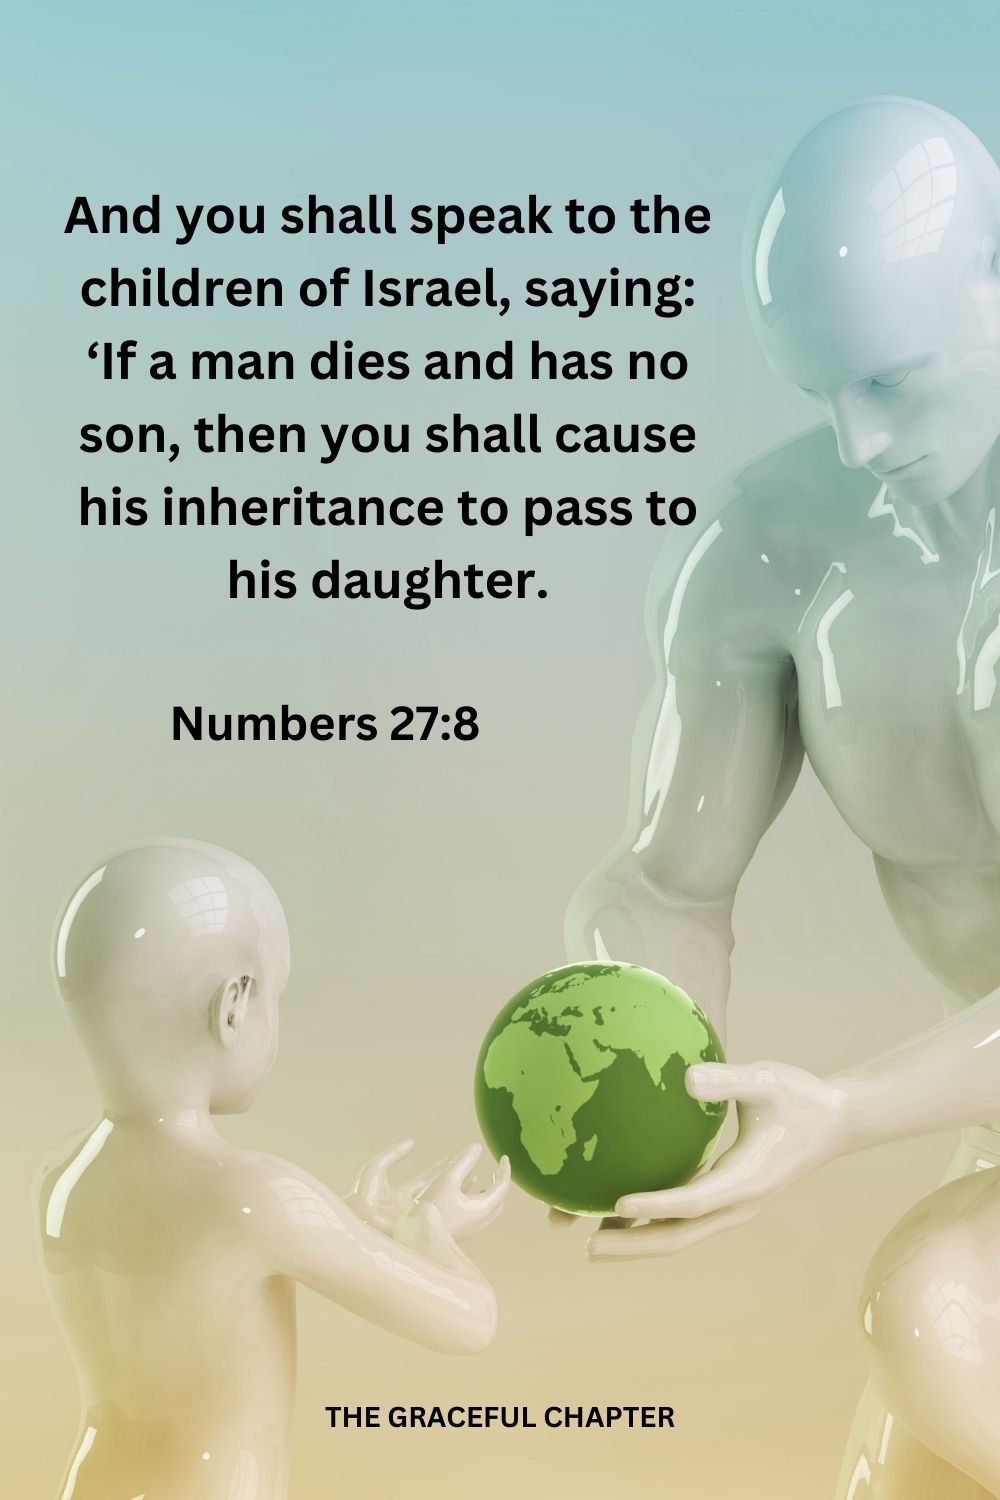 And you shall speak to the children of Israel, saying: ‘If a man dies and has no son, then you shall cause his inheritance to pass to his daughter. Numbers 27:8